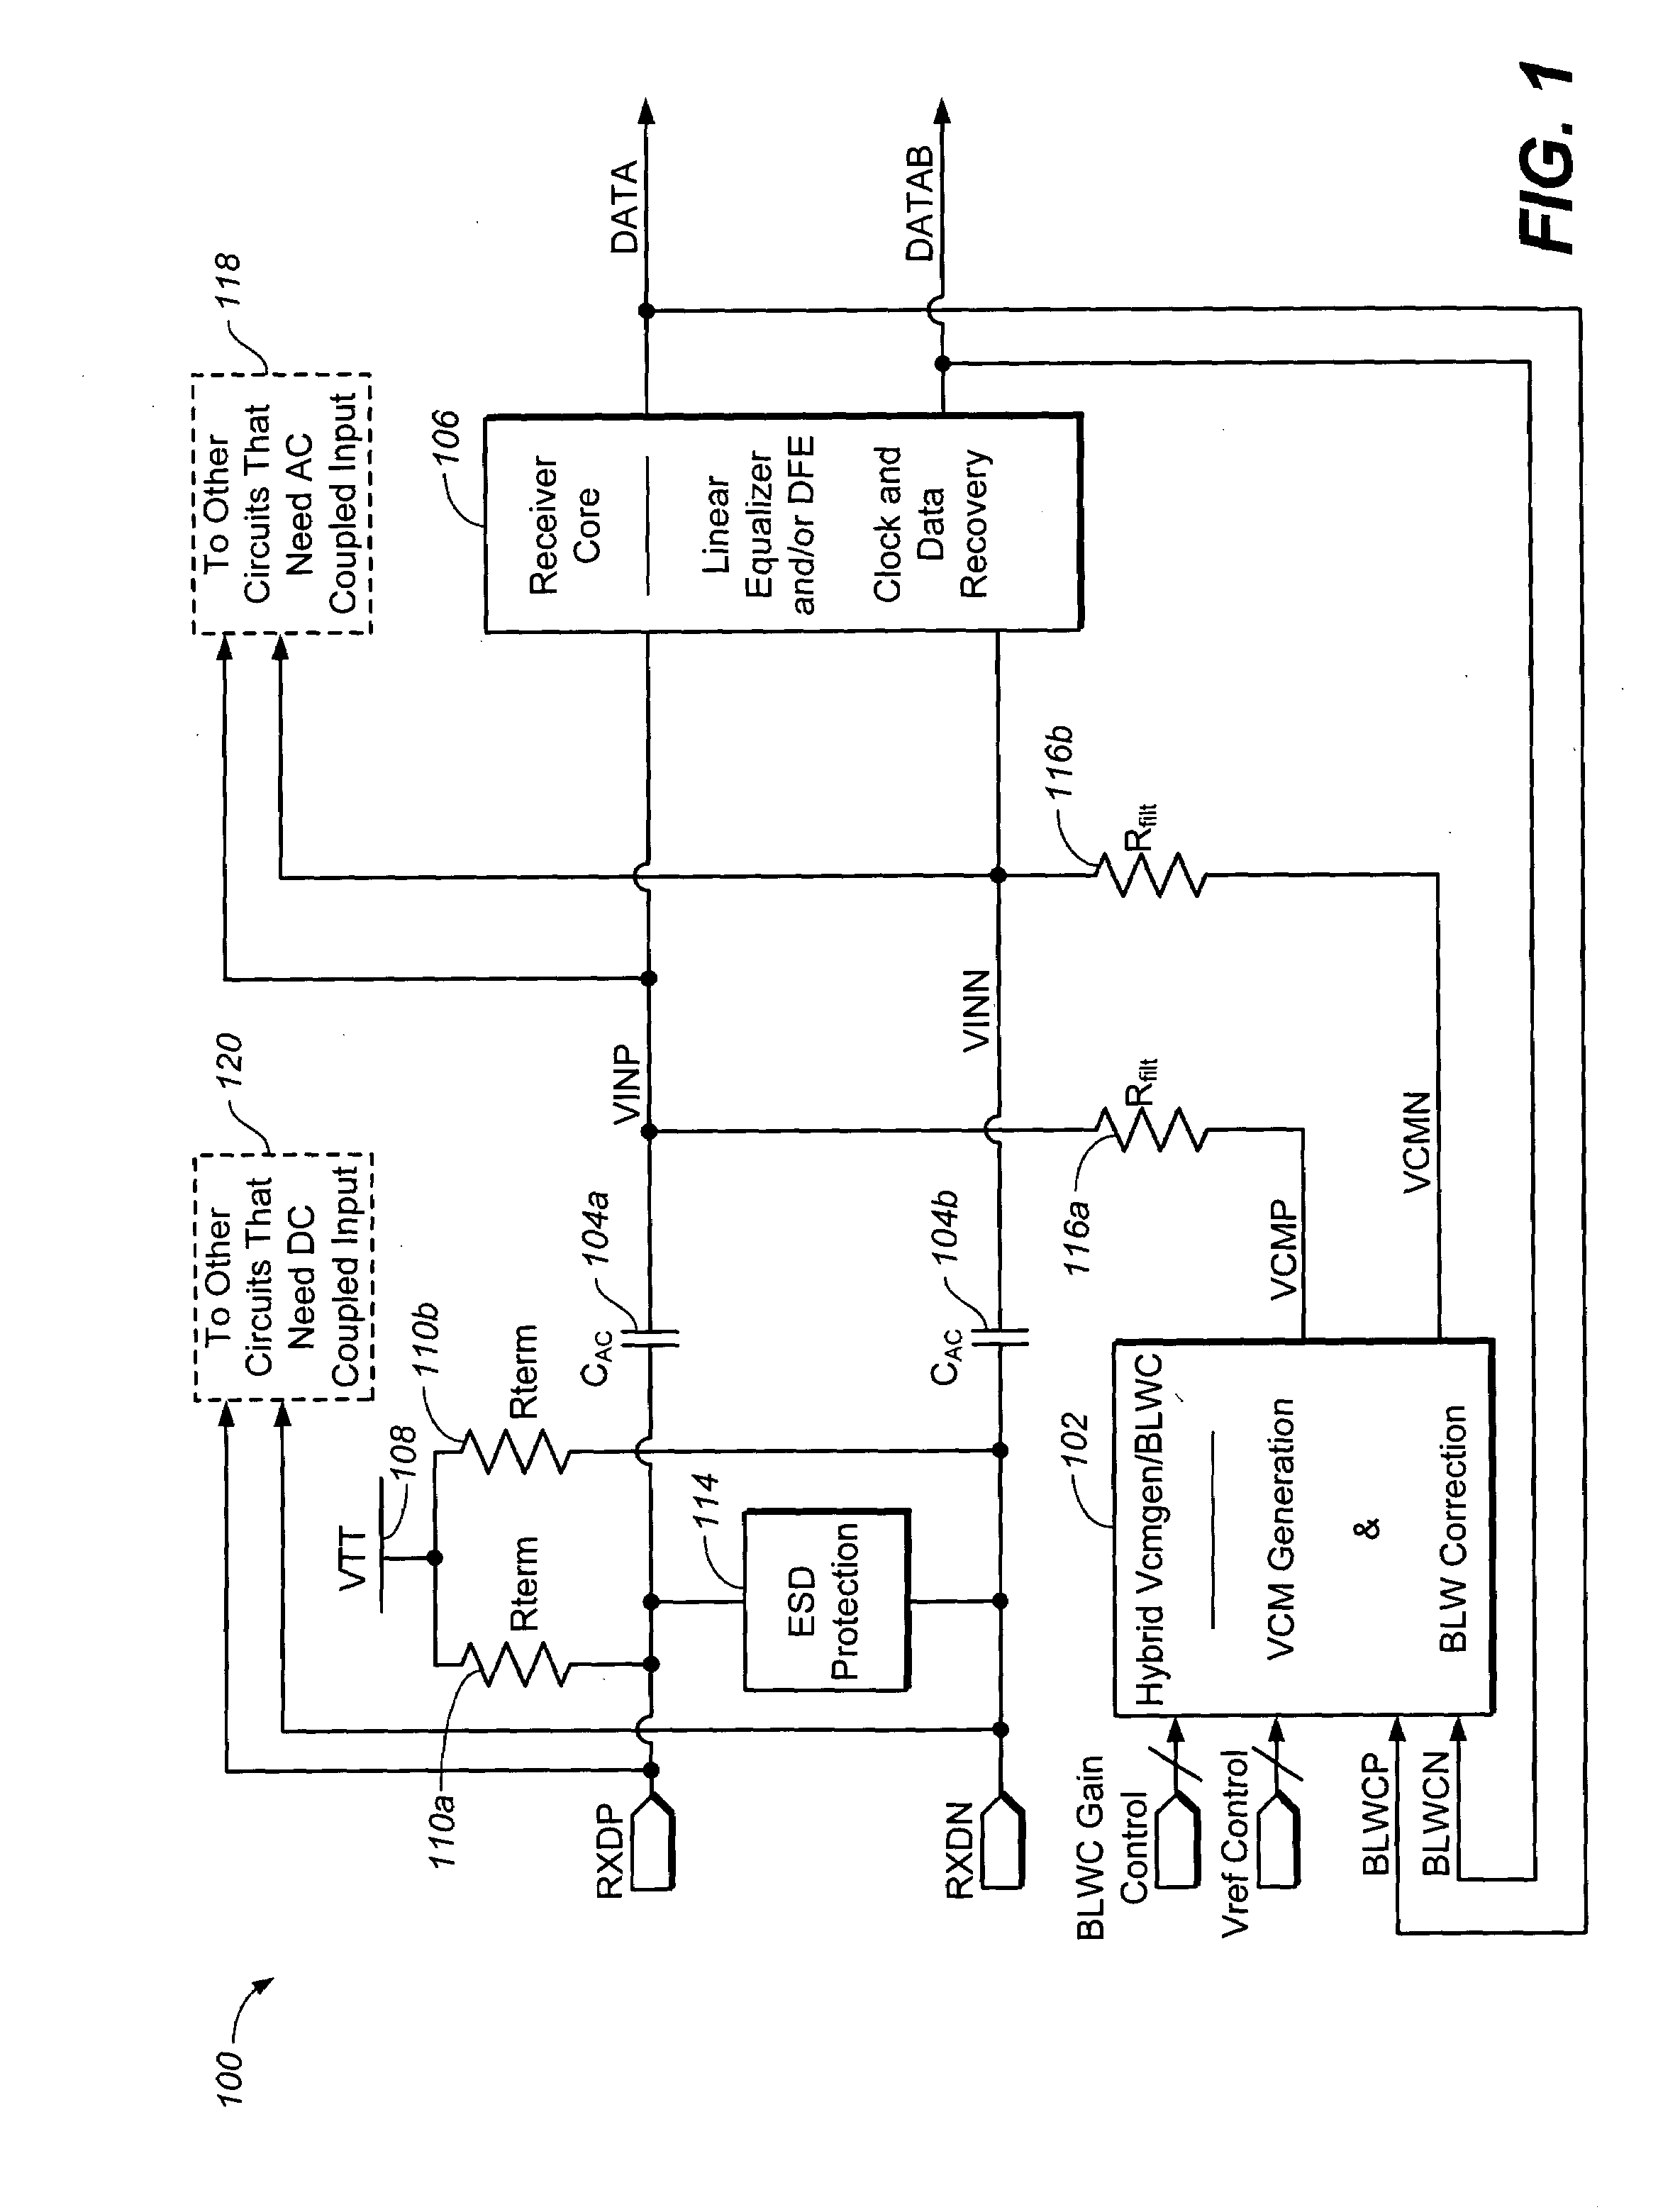 AC coupling circuit integrated with receiver with hybrid stable common-mode voltage generation and baseline-wander compensation